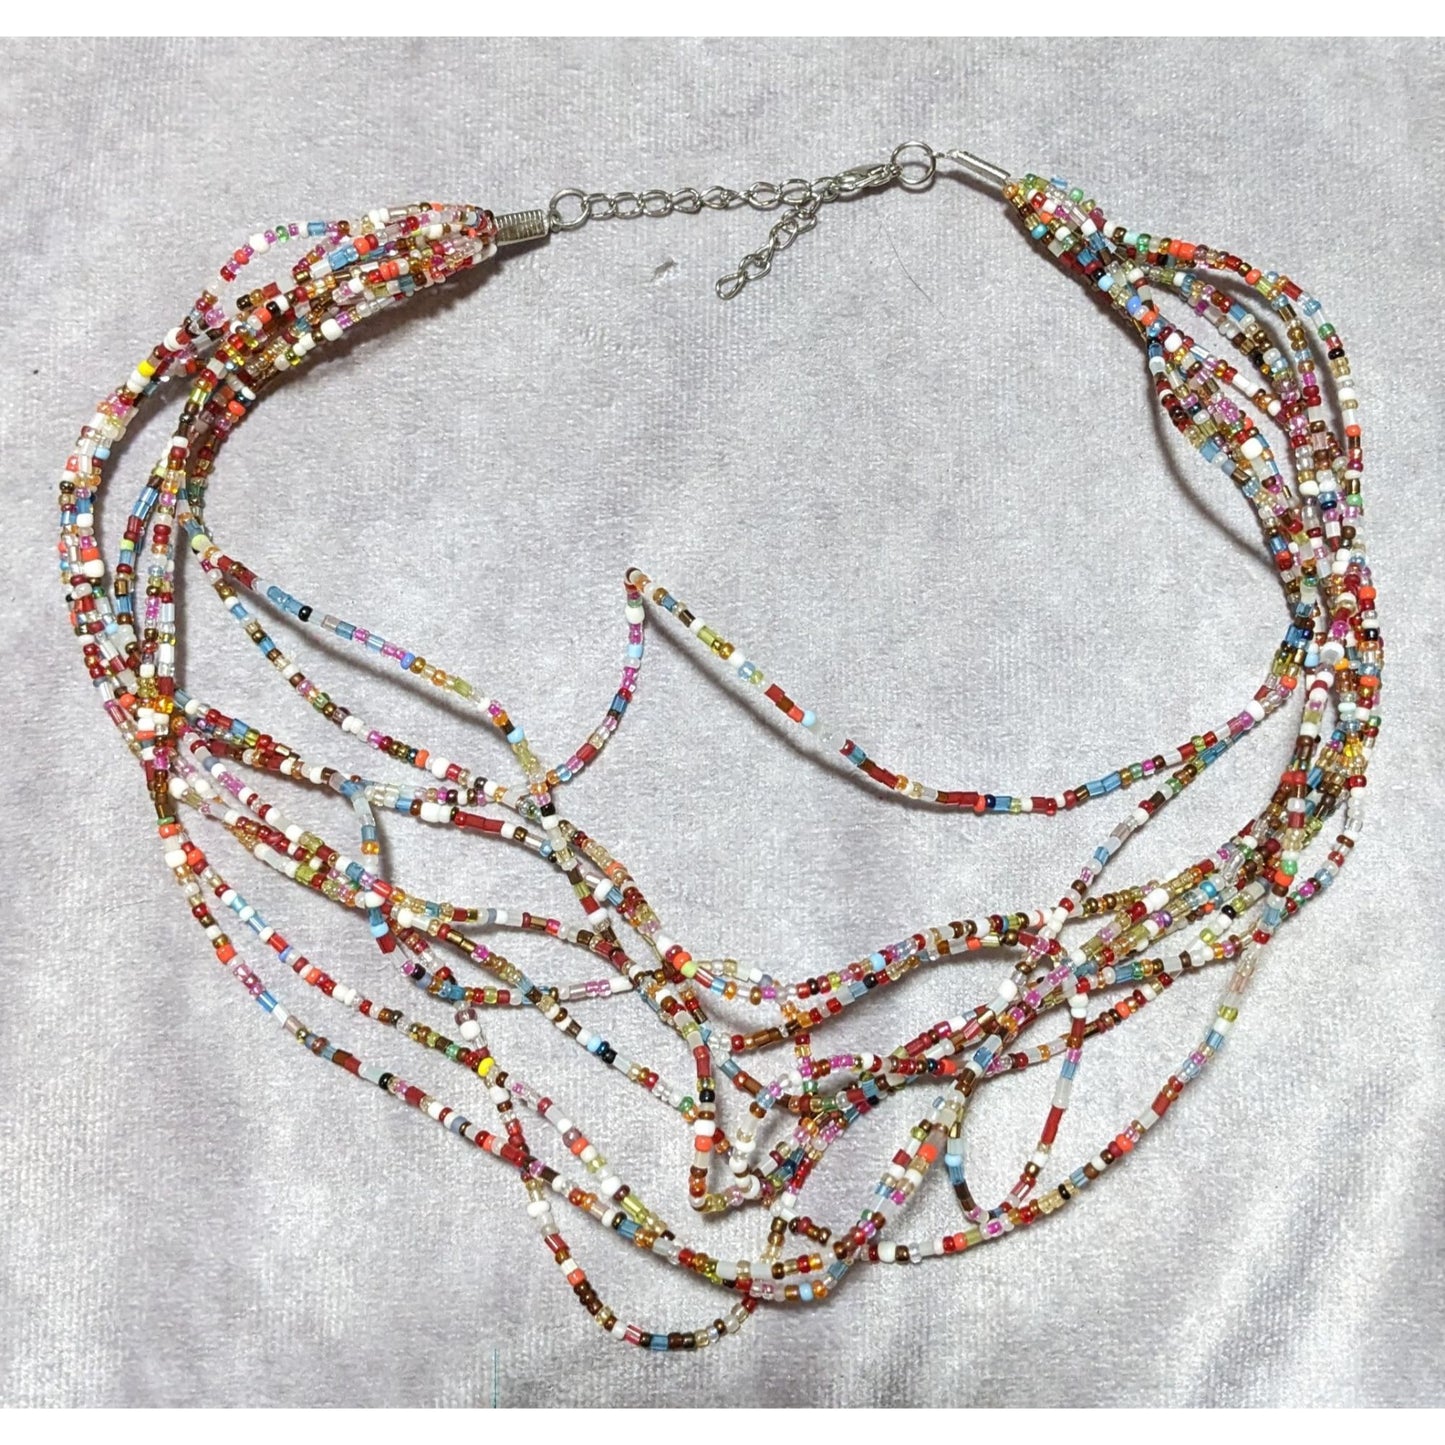 Chaotic Rainbow Beaded Necklace